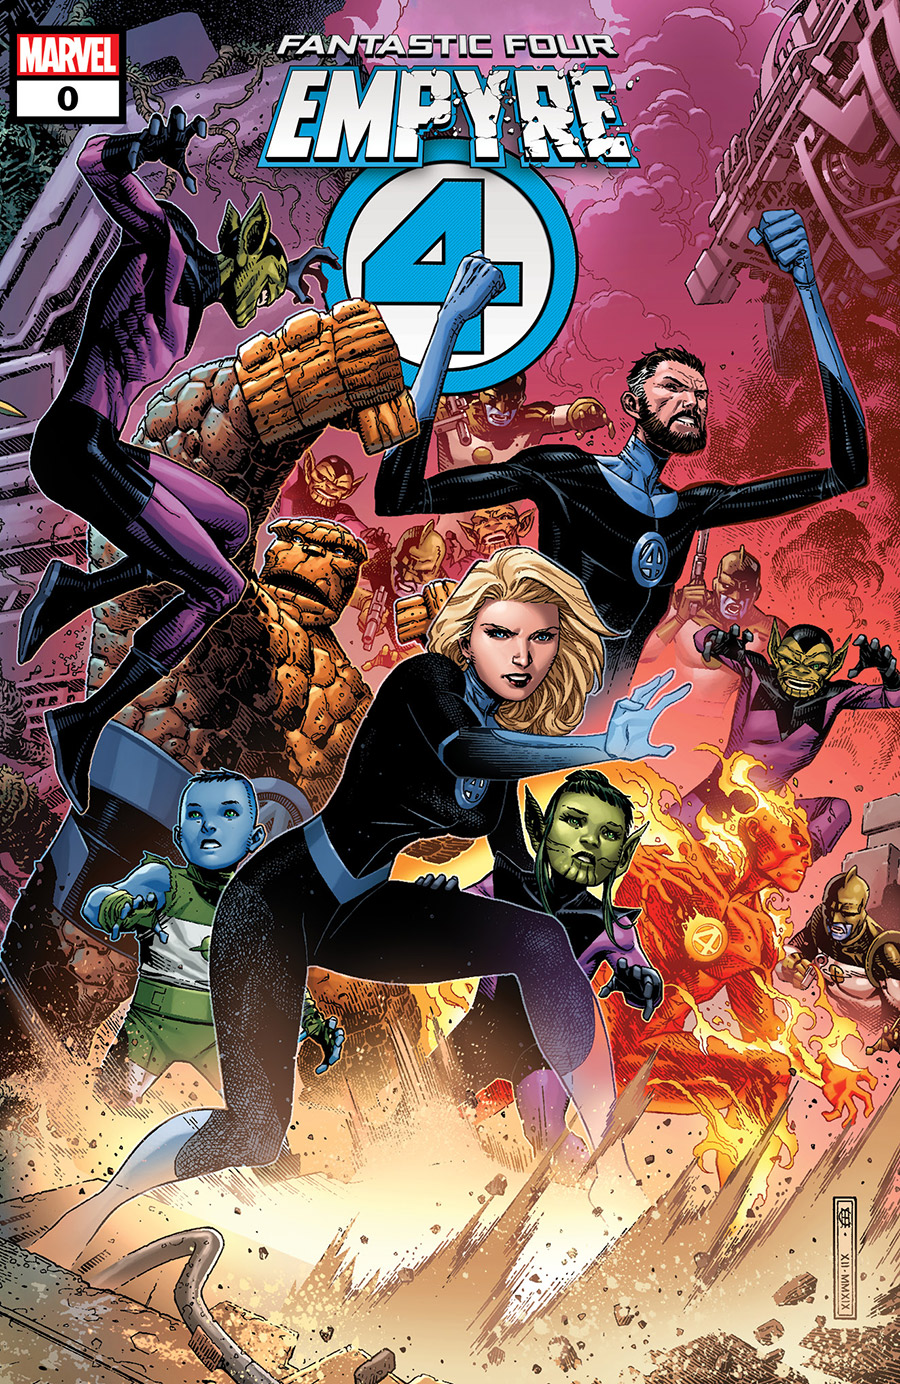 EMPYRE #0: FANTASTIC FOUR Cover by JIM CHEUNG